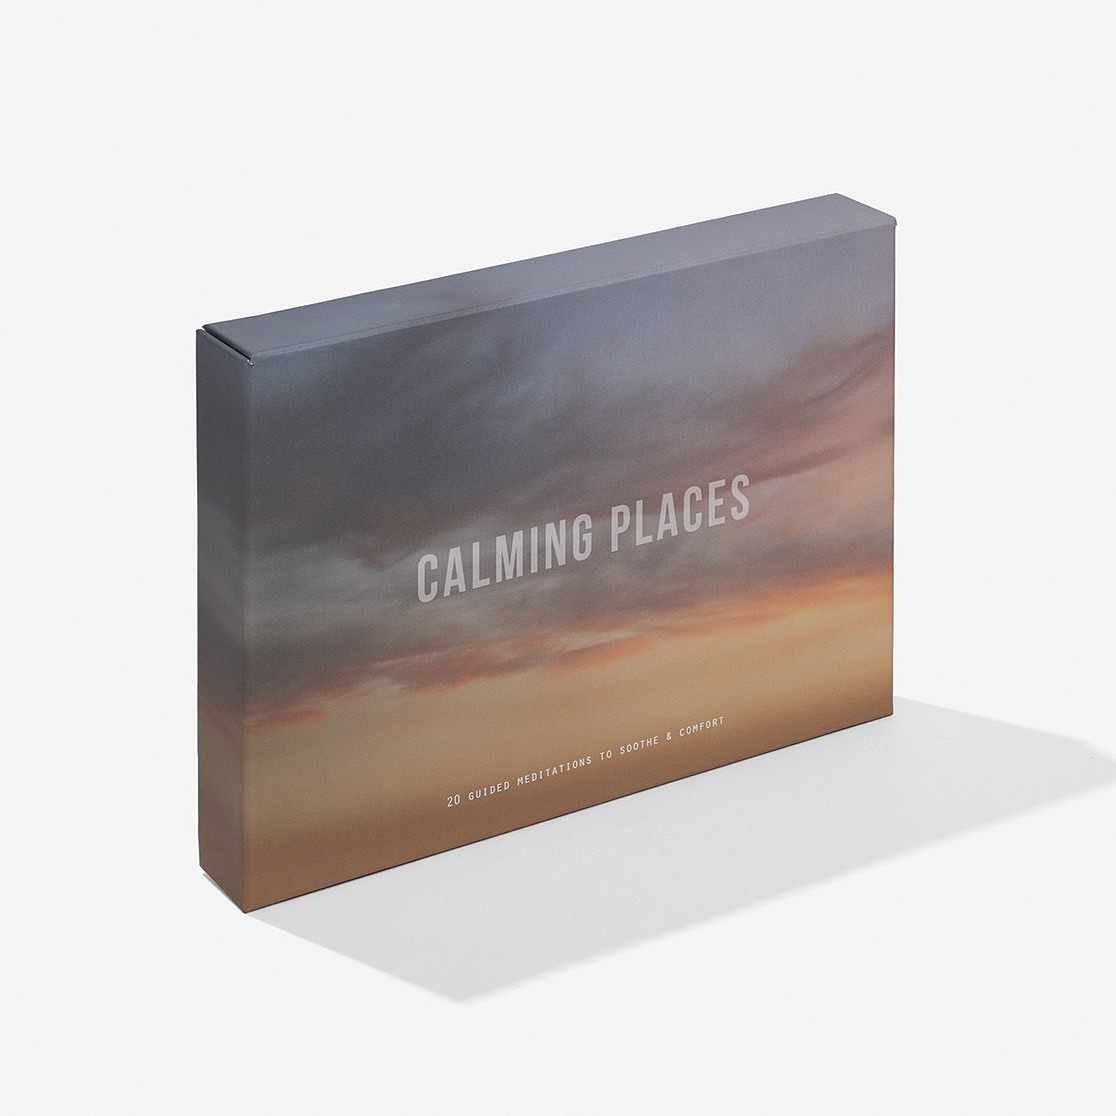 CALMING PLACES | 20 MEDITATIONS-KARTEN | English Edition | The School of Life - Charles & Marie